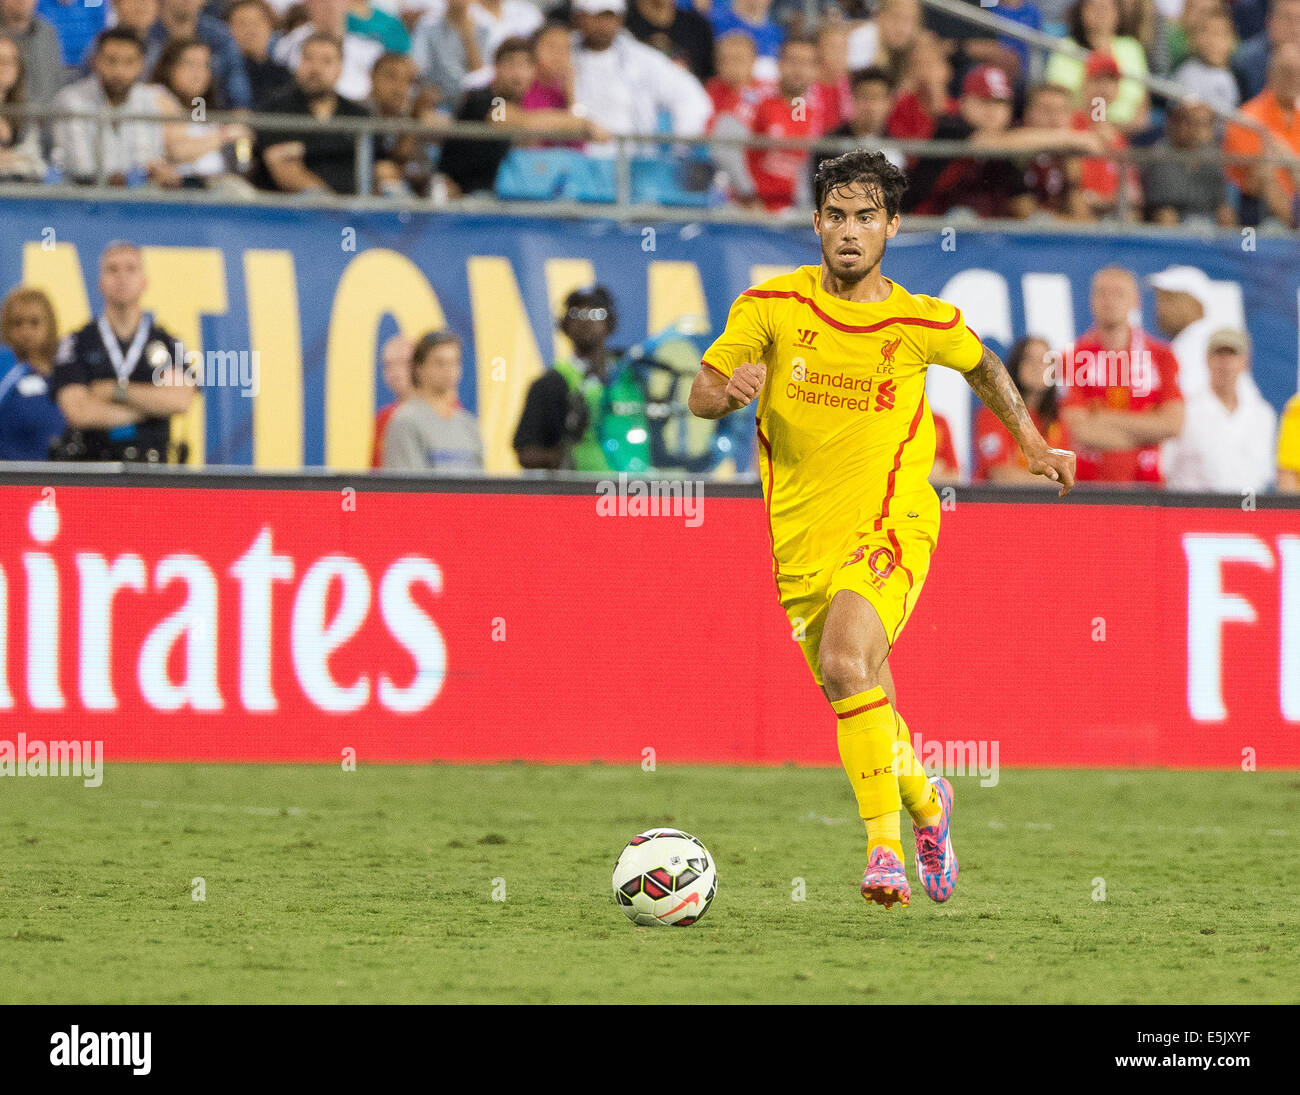 Charlotte, North Carolina, USA. 2nd Aug, 2014. Liverpool Forward JESUS FERNANDEZ SAEZ SUSO (30) about to score during the 2014 Guinness International Champions Cup match between AC Milan and Liverpool at Bank of America Stadium in Charlotte, NC. Liverpool goes on to win 2 to 0. Credit:  Jason Walle/ZUMA Wire/Alamy Live News Stock Photo